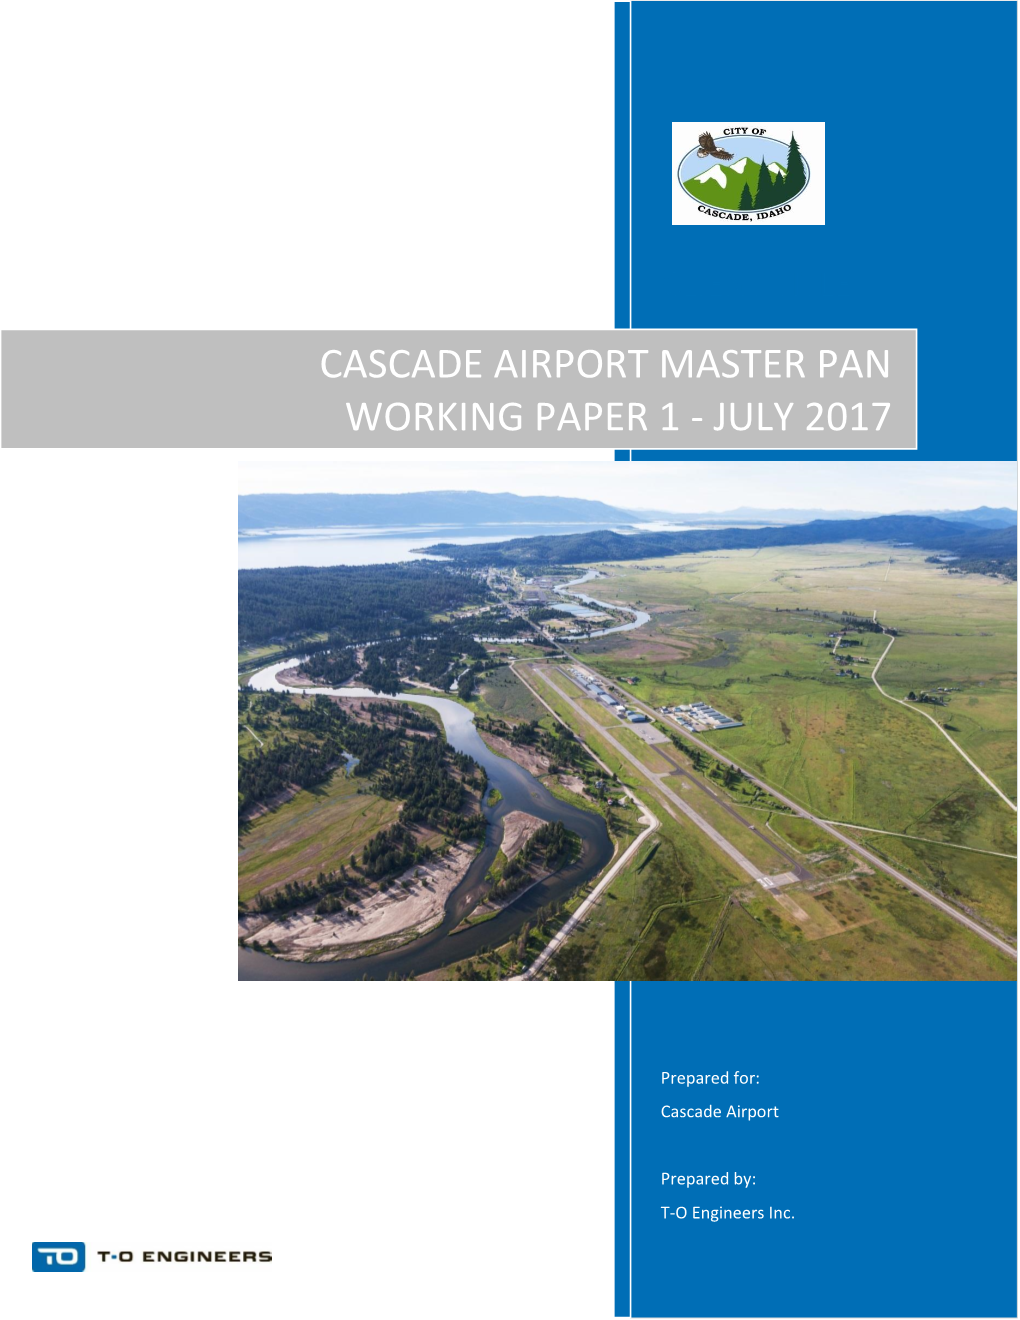 Cascade Airport Master Pan Working Paper 1 - July 2017